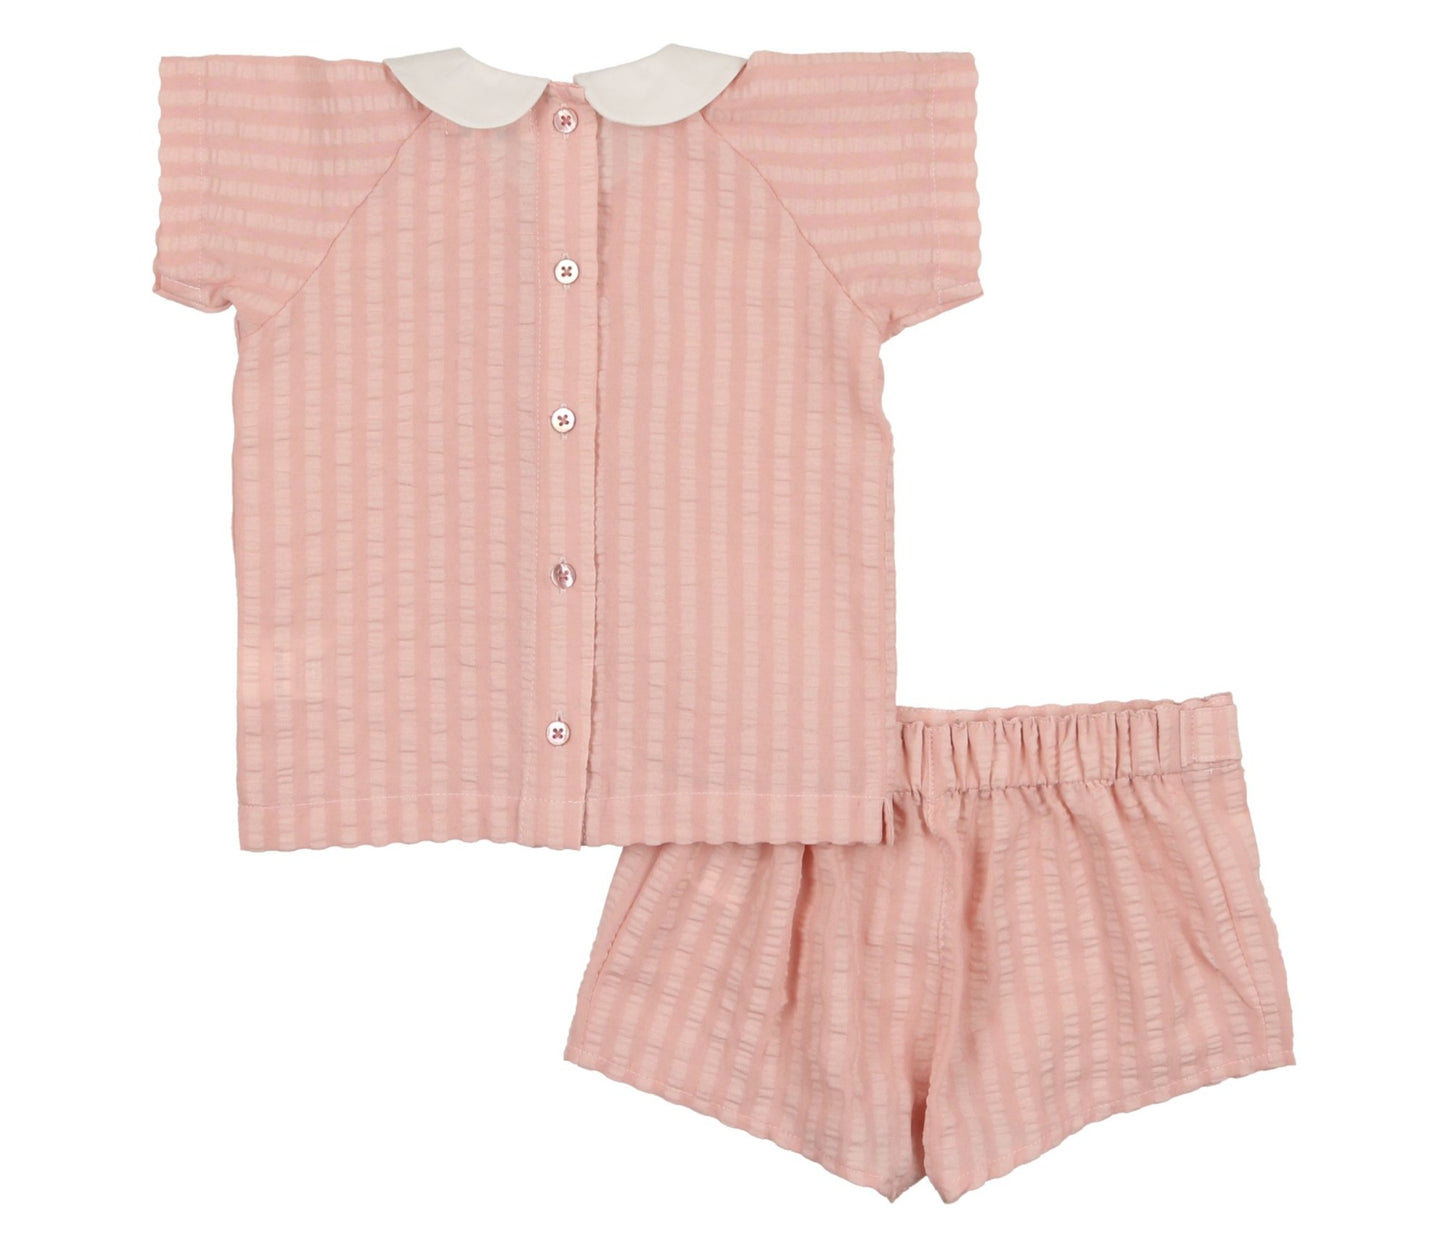 Coco Blanc Seersucker Collared Outfit Set